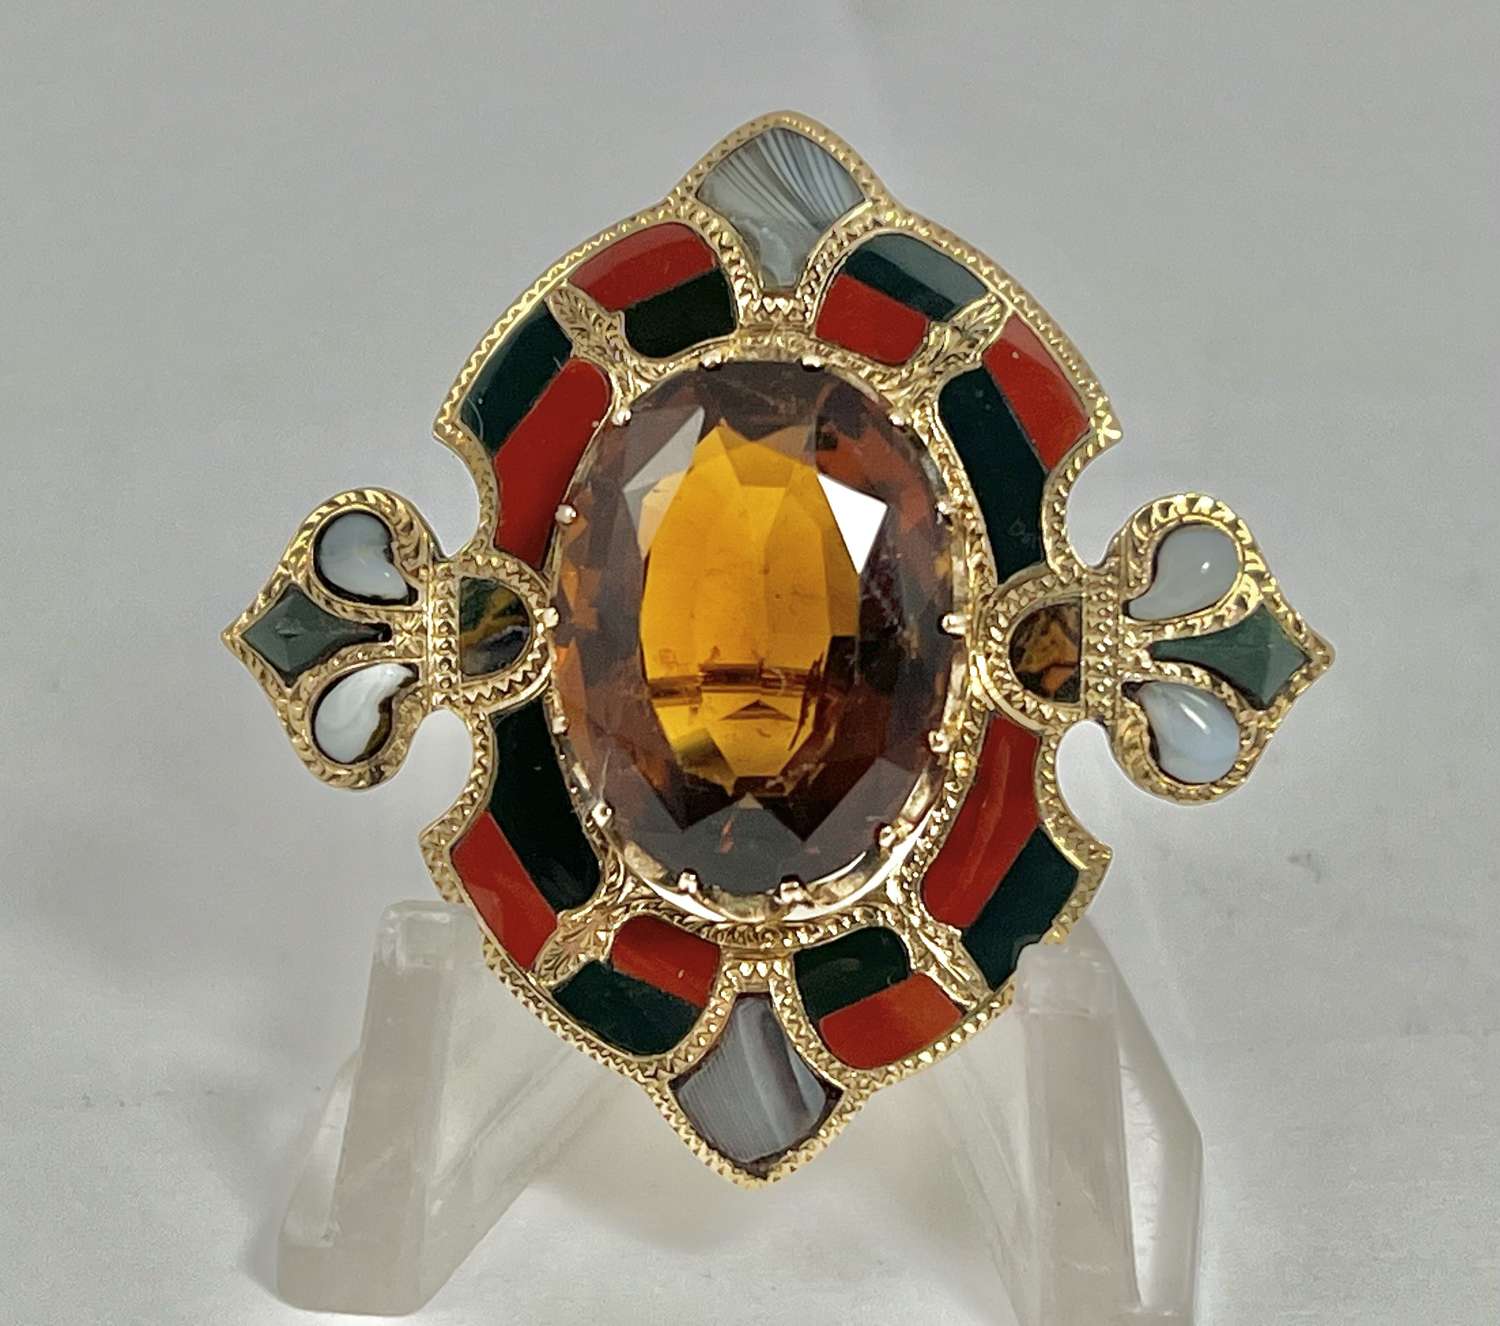 Scottish antique gold and agate brooch, 1881